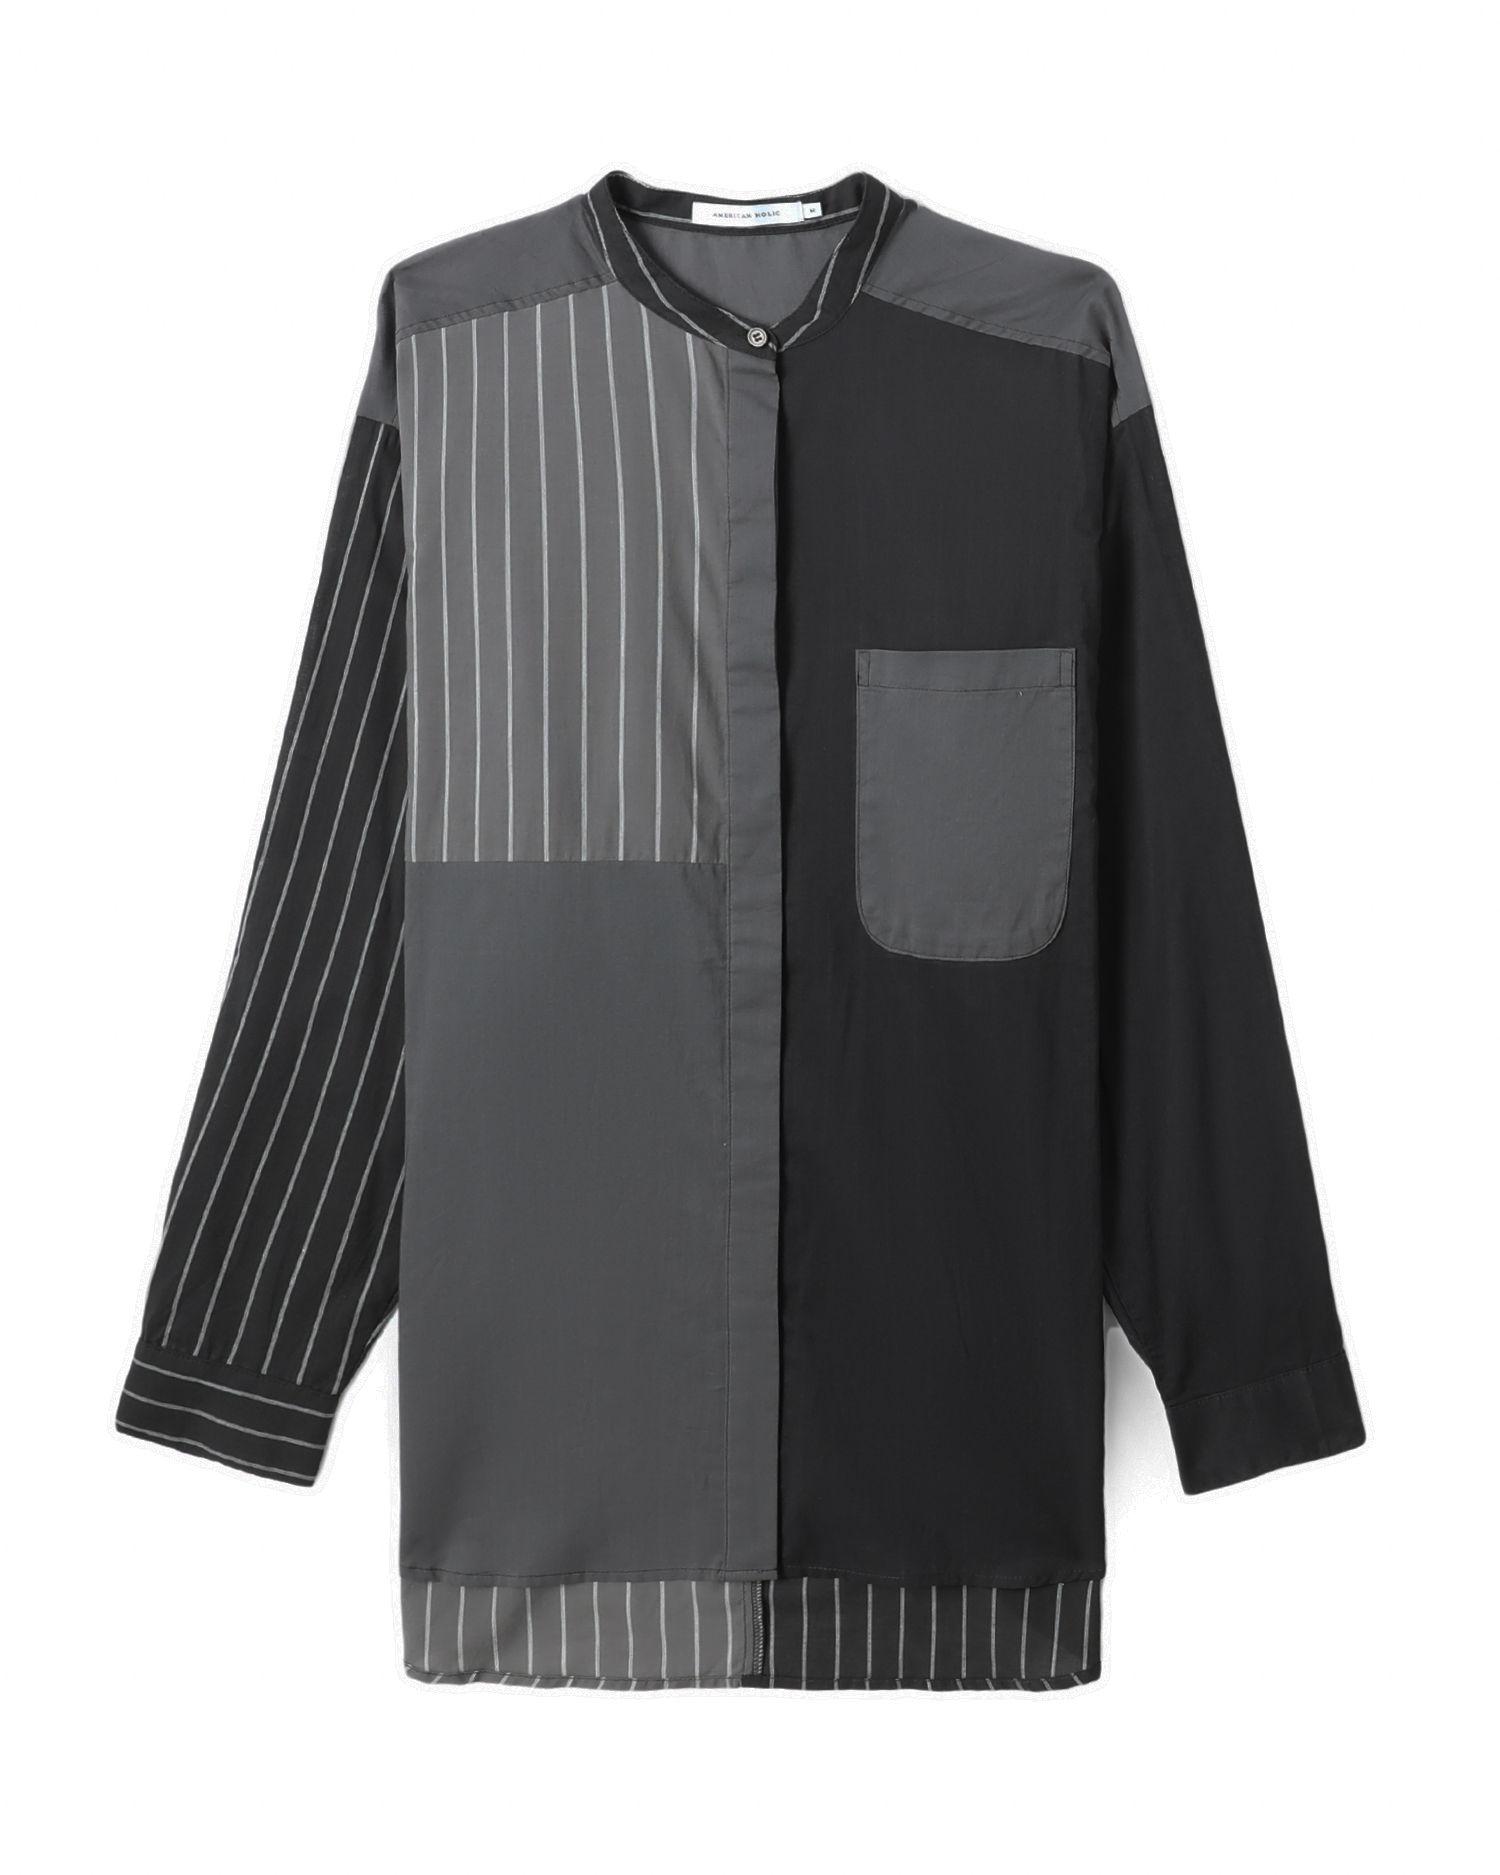 Panelled striped shirt by AMERICAN HOLIC